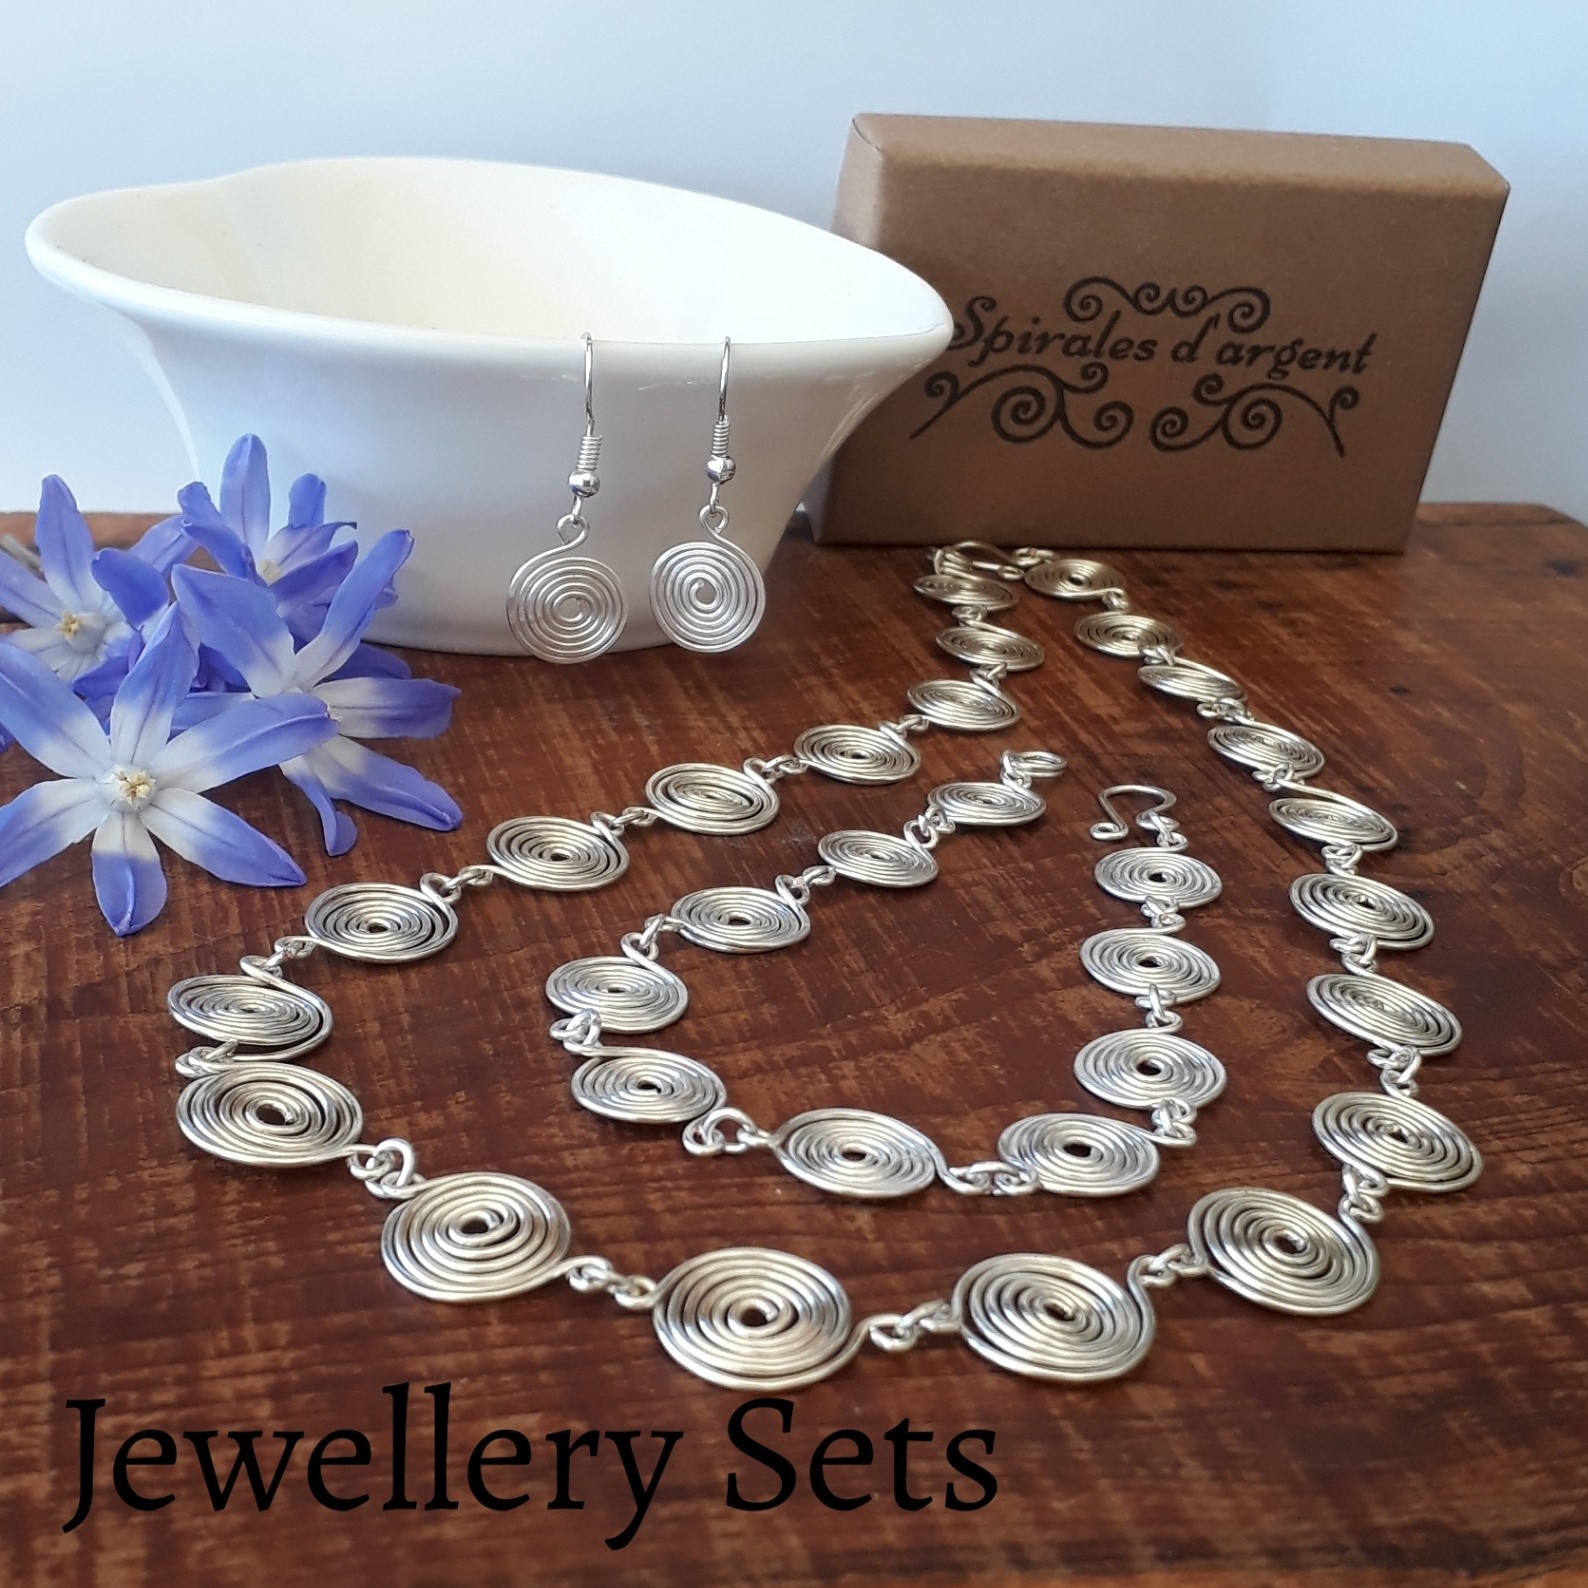 Silver Spiral Jewellery Sets